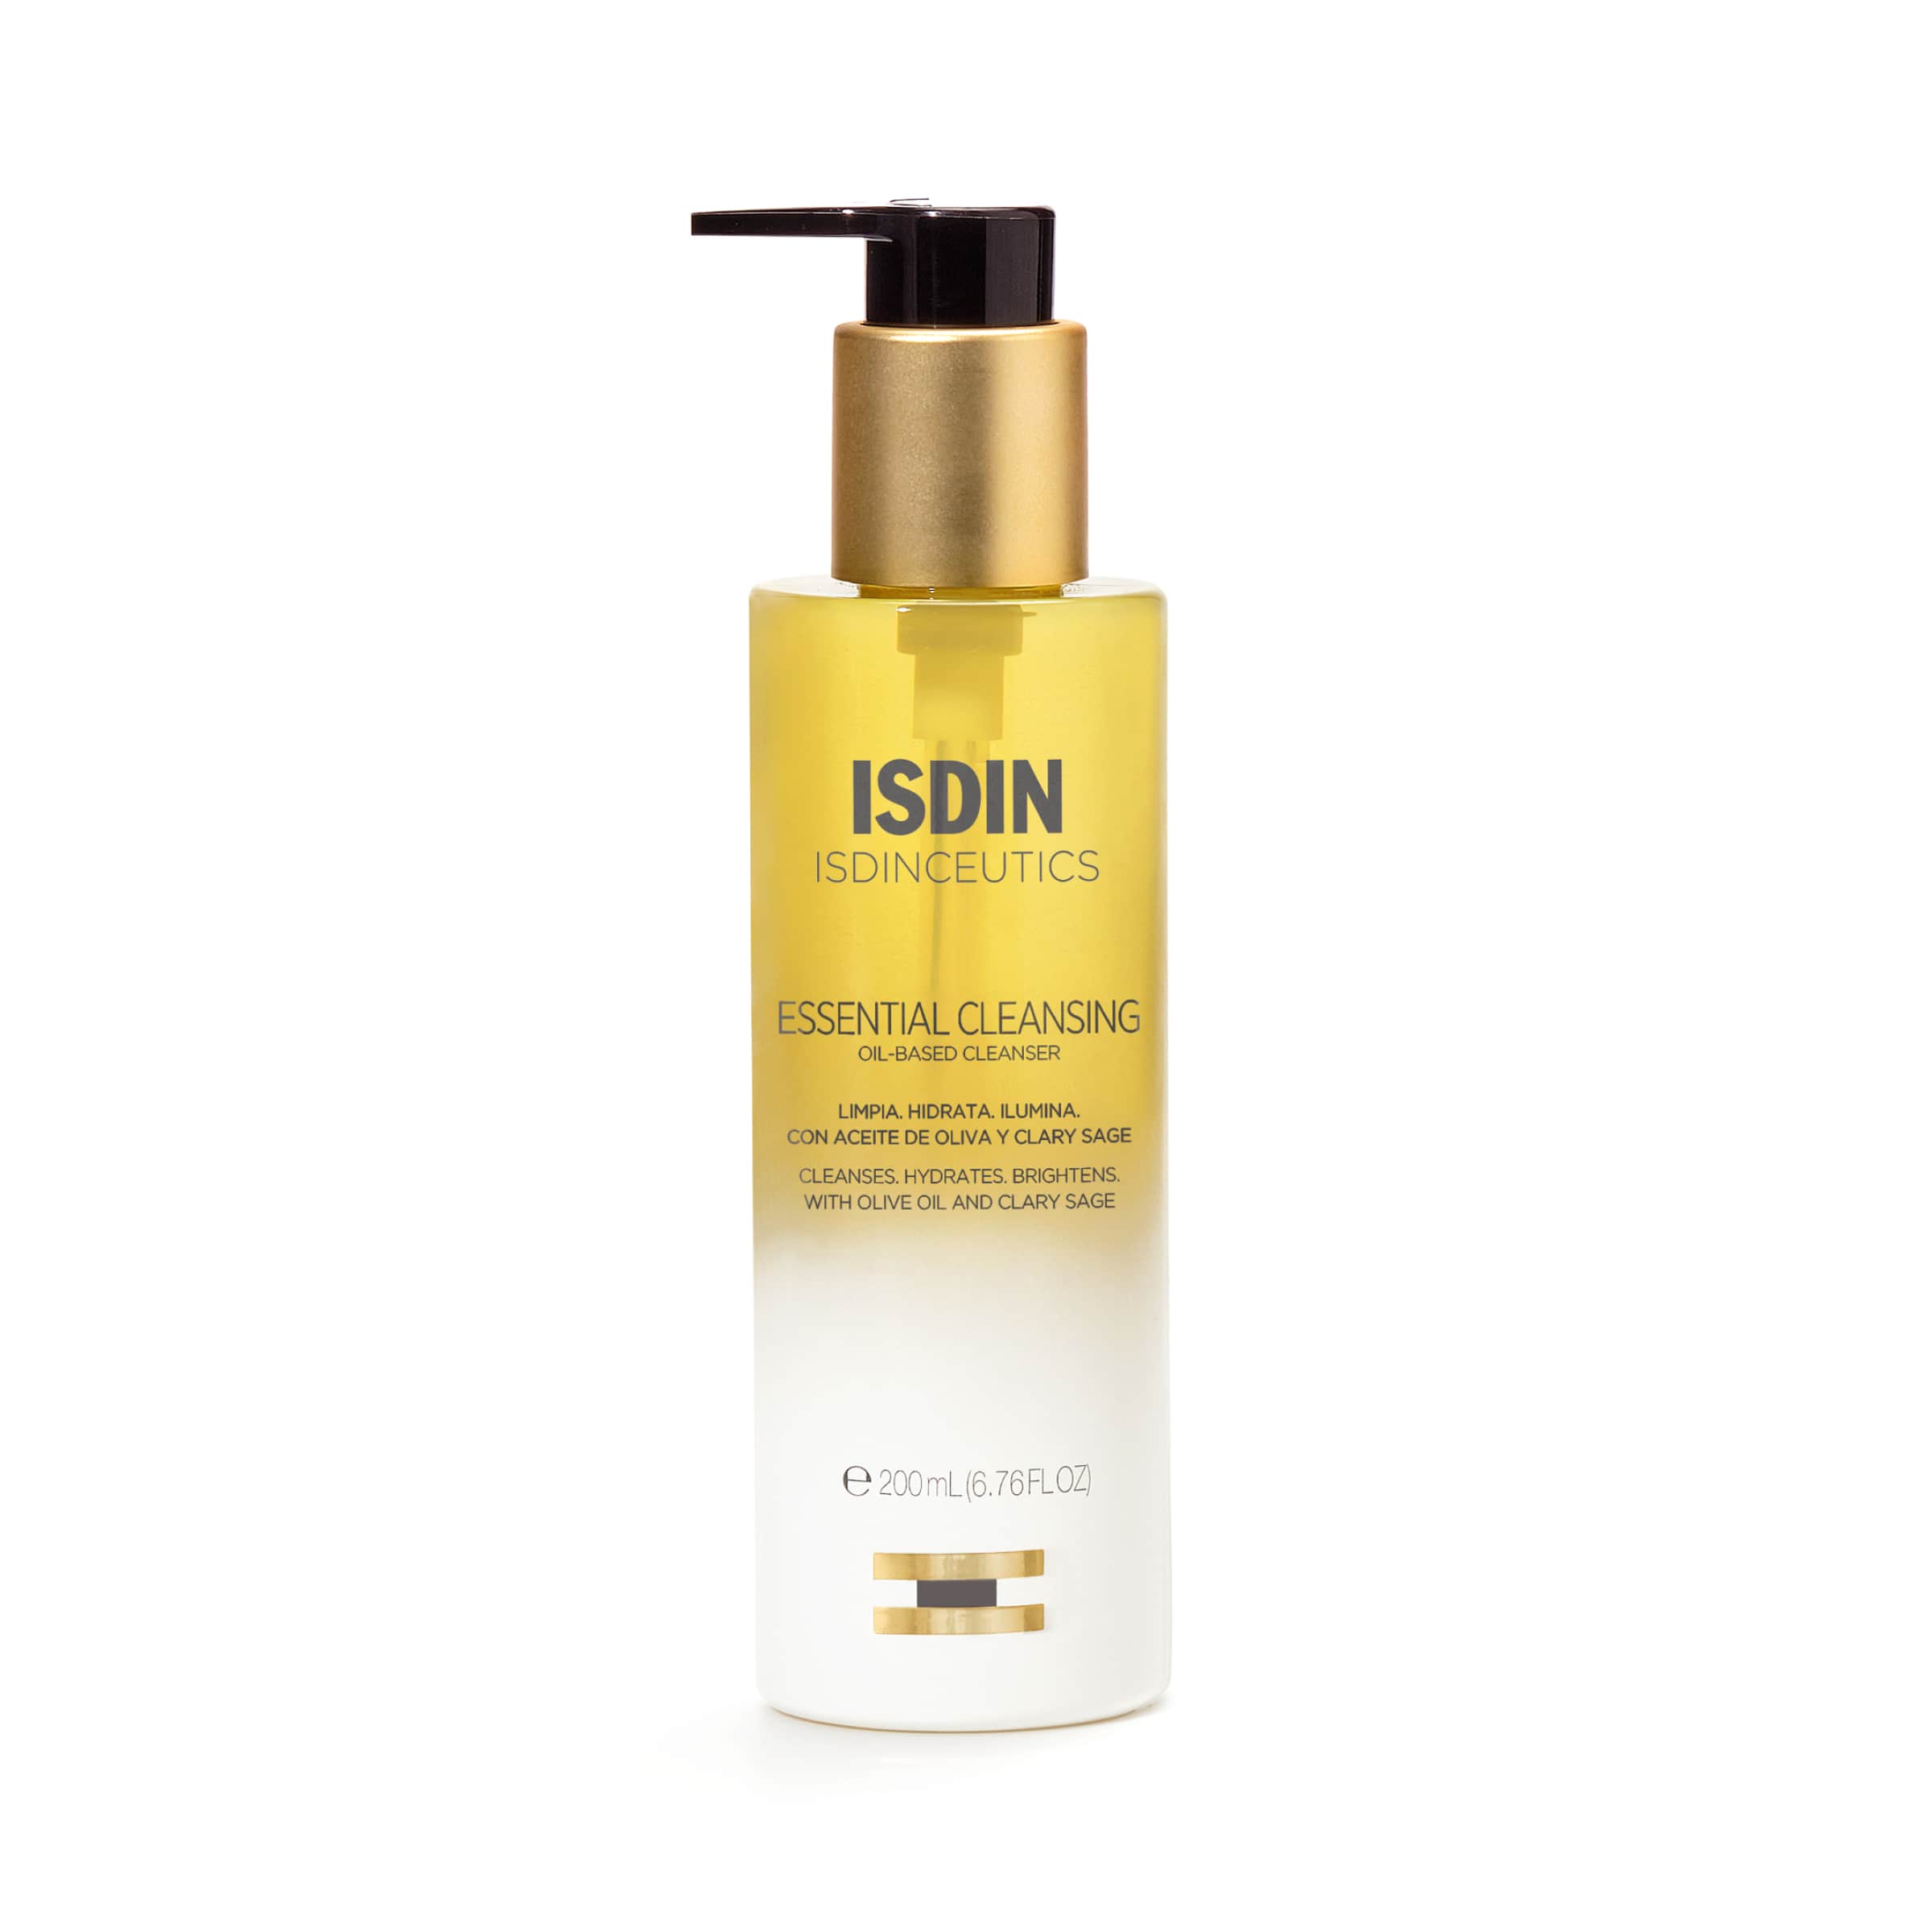 ISDIN Essential Cleansing - Facial Cleansing Oil